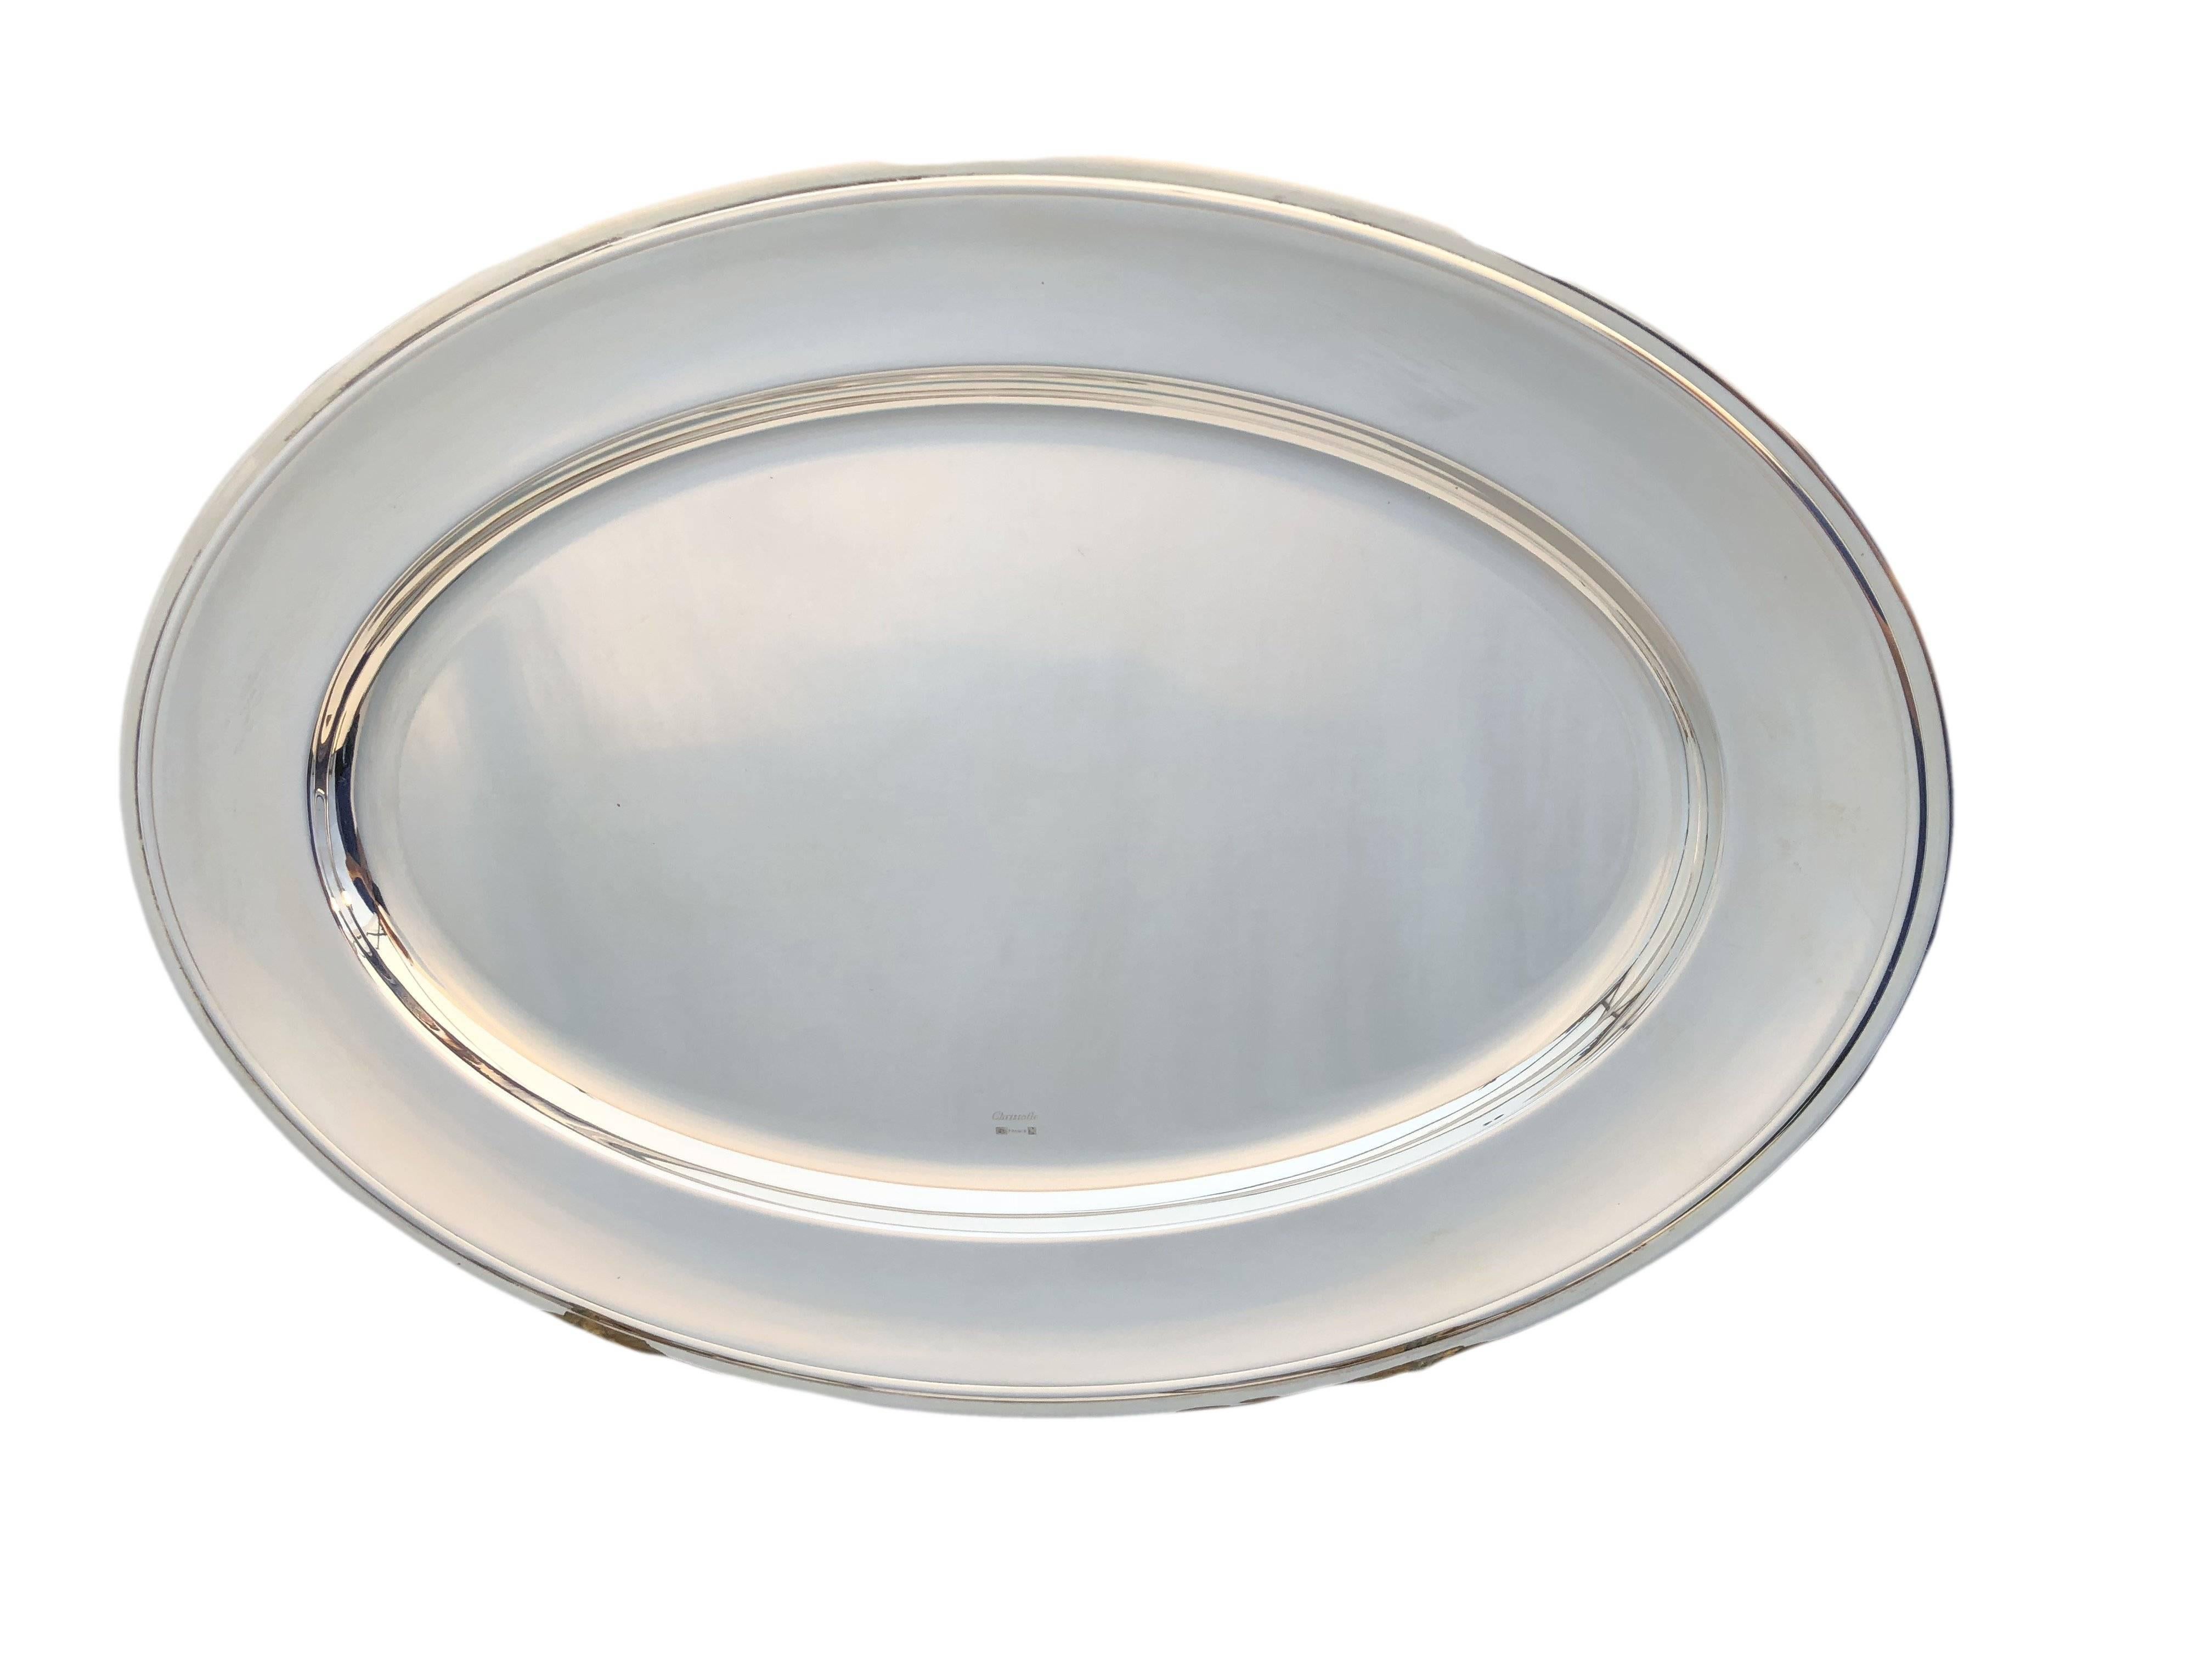 French Never Used Christofle Silver Plated Oval Serving Tray in Box, Model Vibrations